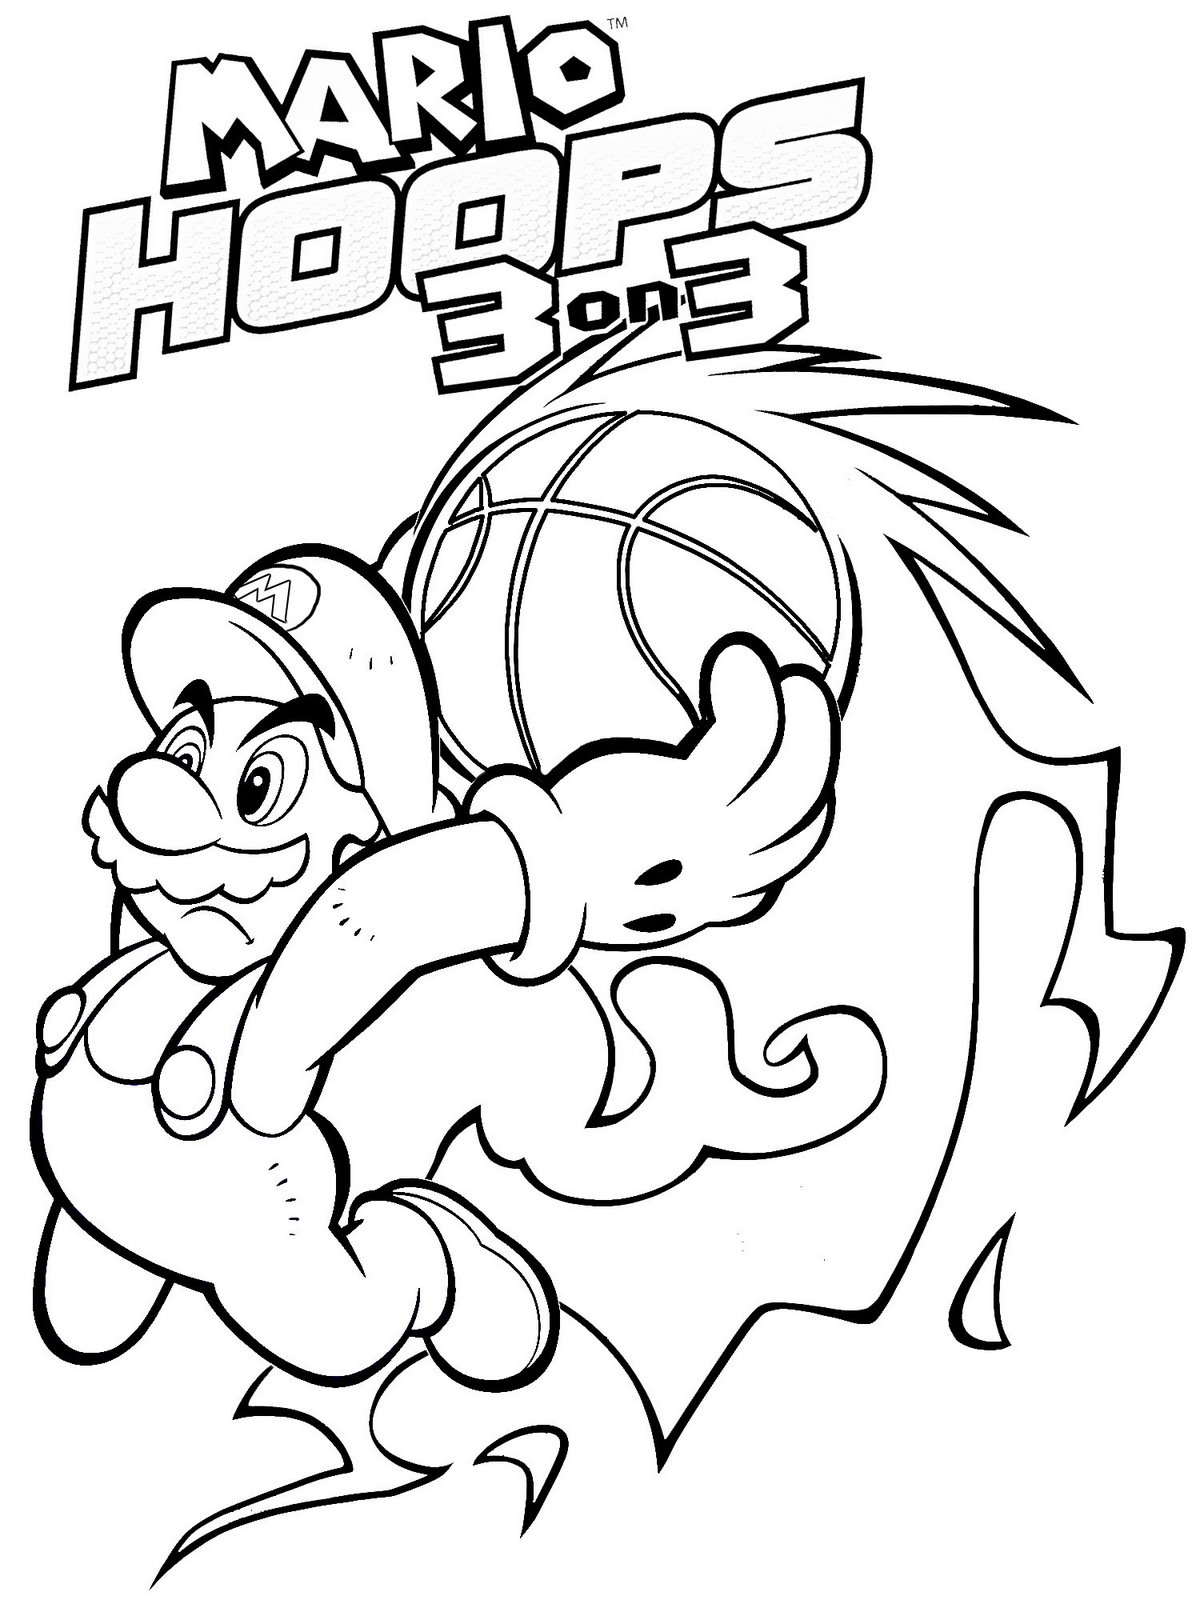 Super Mario Coloring Pages (2) - Coloring Kids